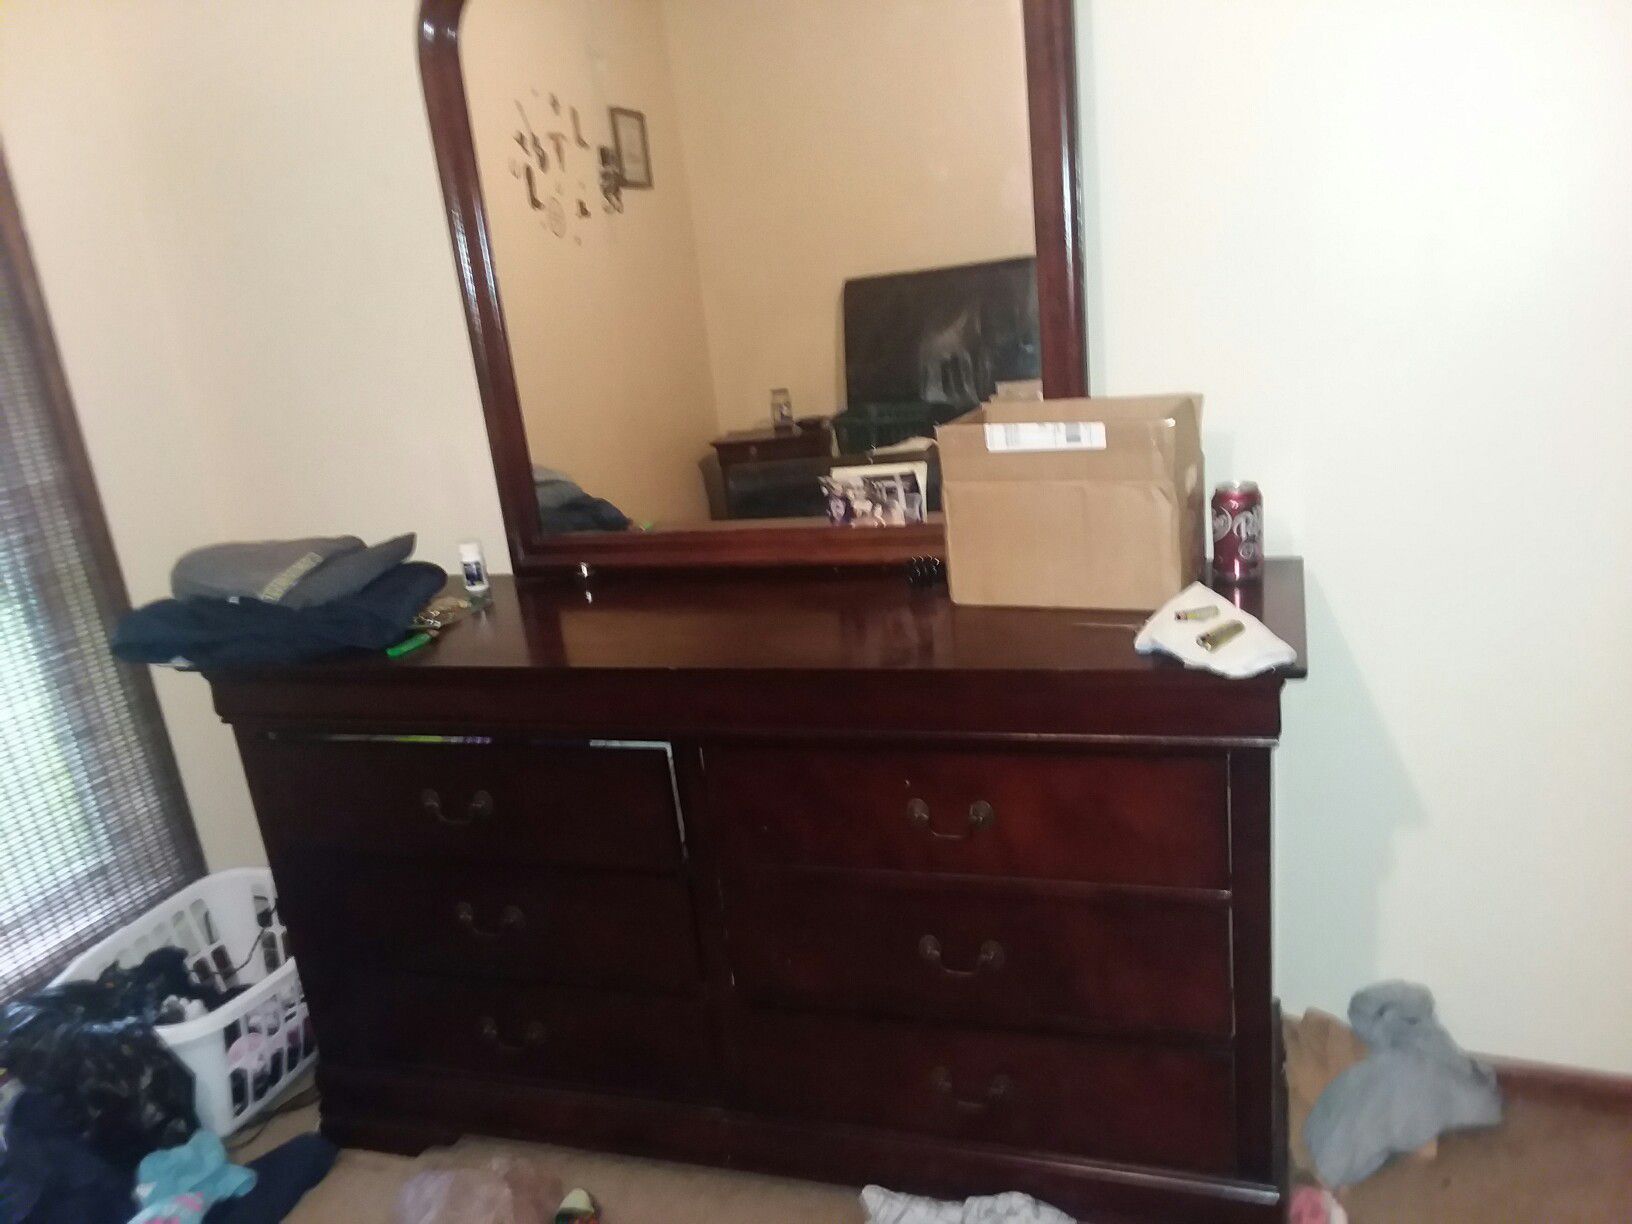 (EXCUSE THE MESS WE ARE IN THE PROCESS OF MOVING!!!) New Cherry wood Dresser W/ Mirror, 5 chesser drawer dresser, and nightstand